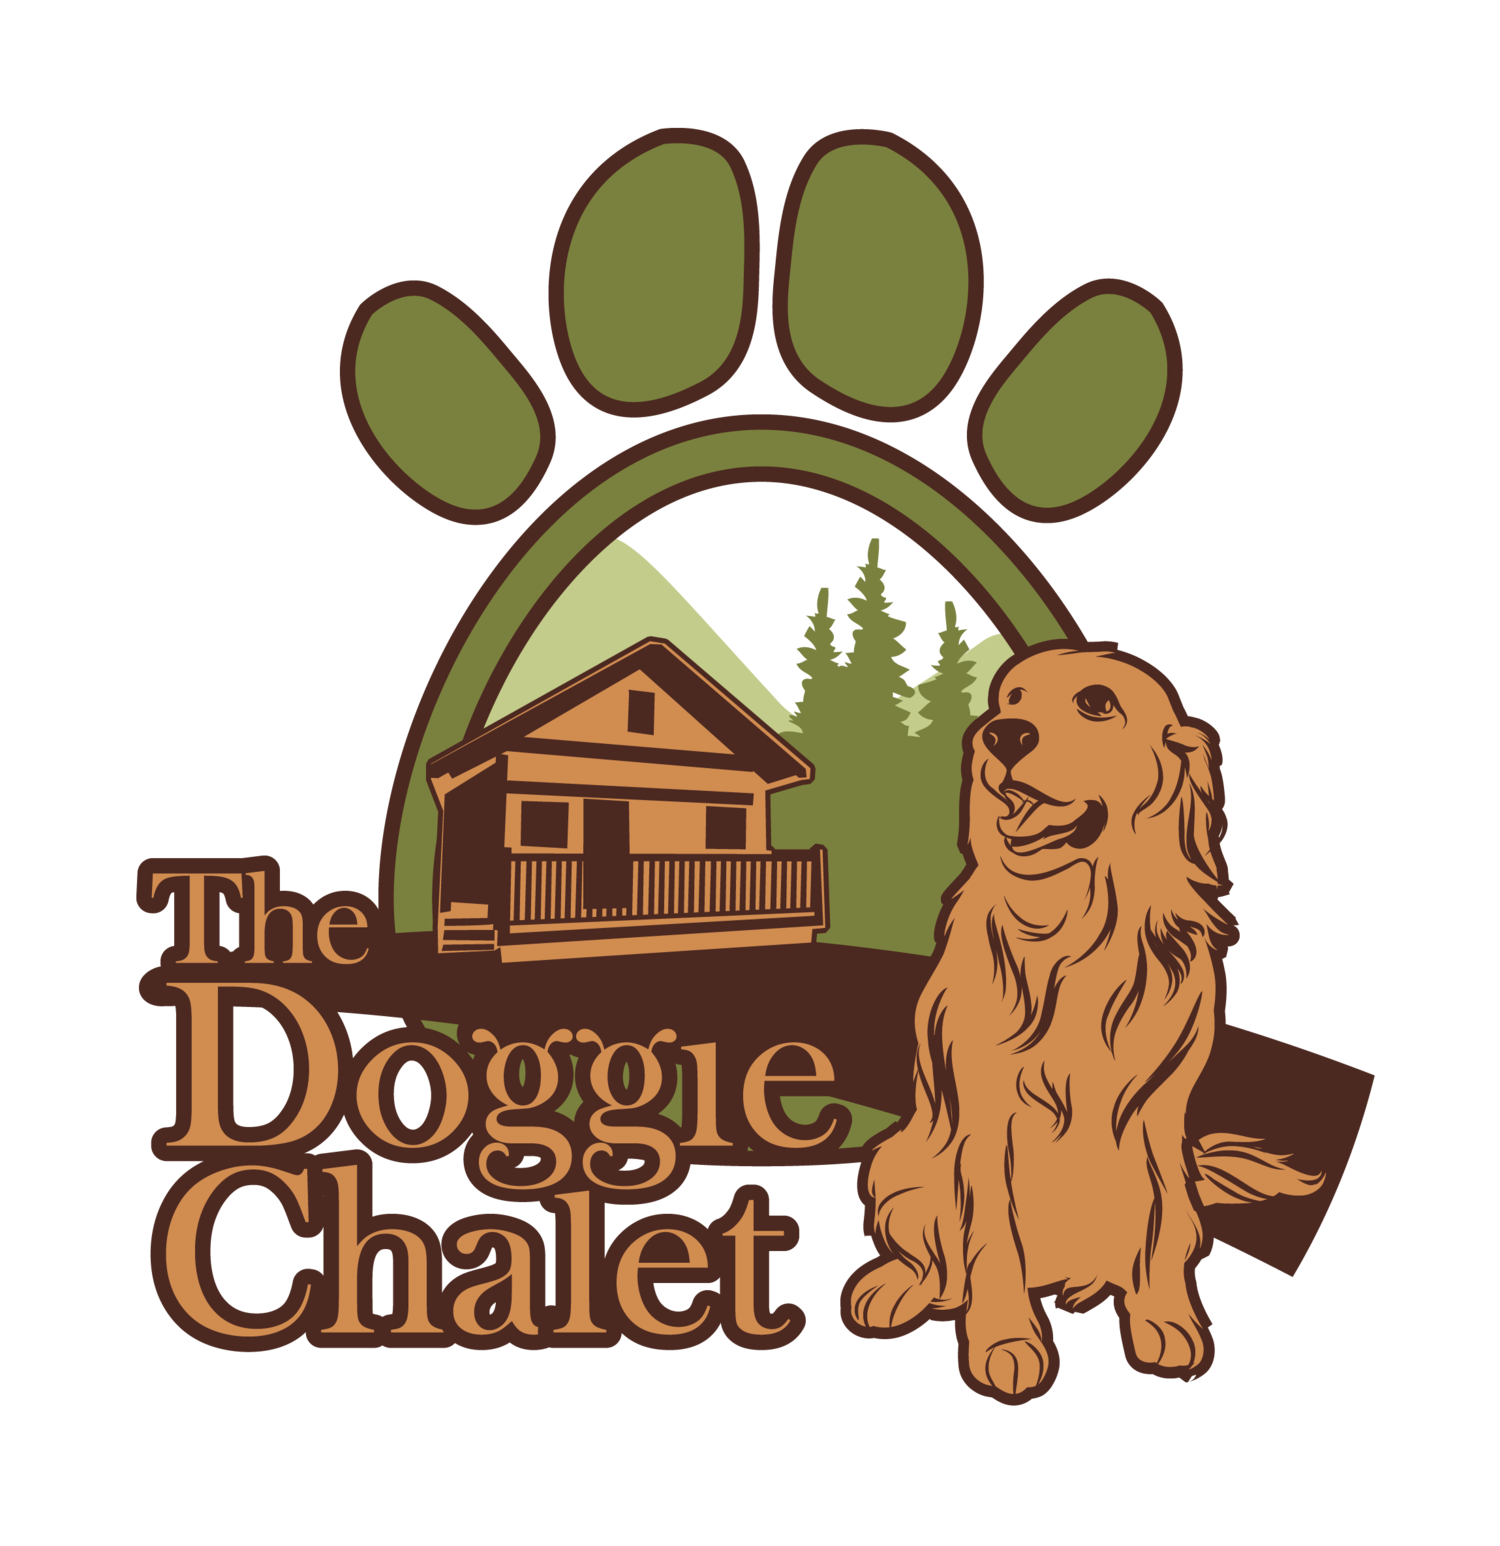 The Doggie Chalet